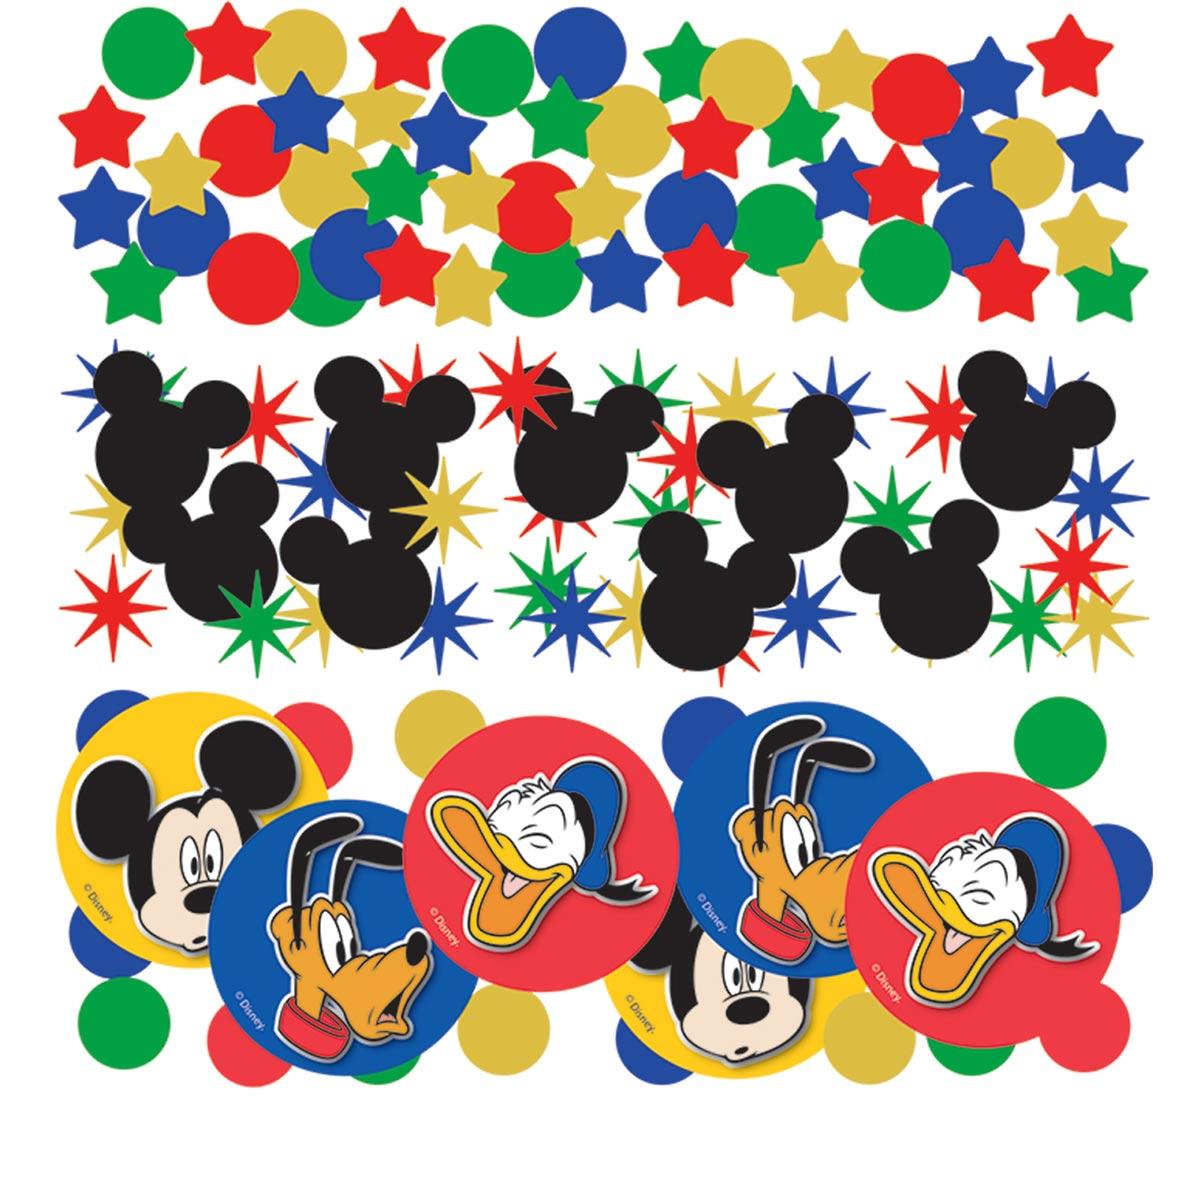 Mickey Mouse Party Confetti 3 Pack by Amscan 9903178 available here at Karnival Costumes online party shop